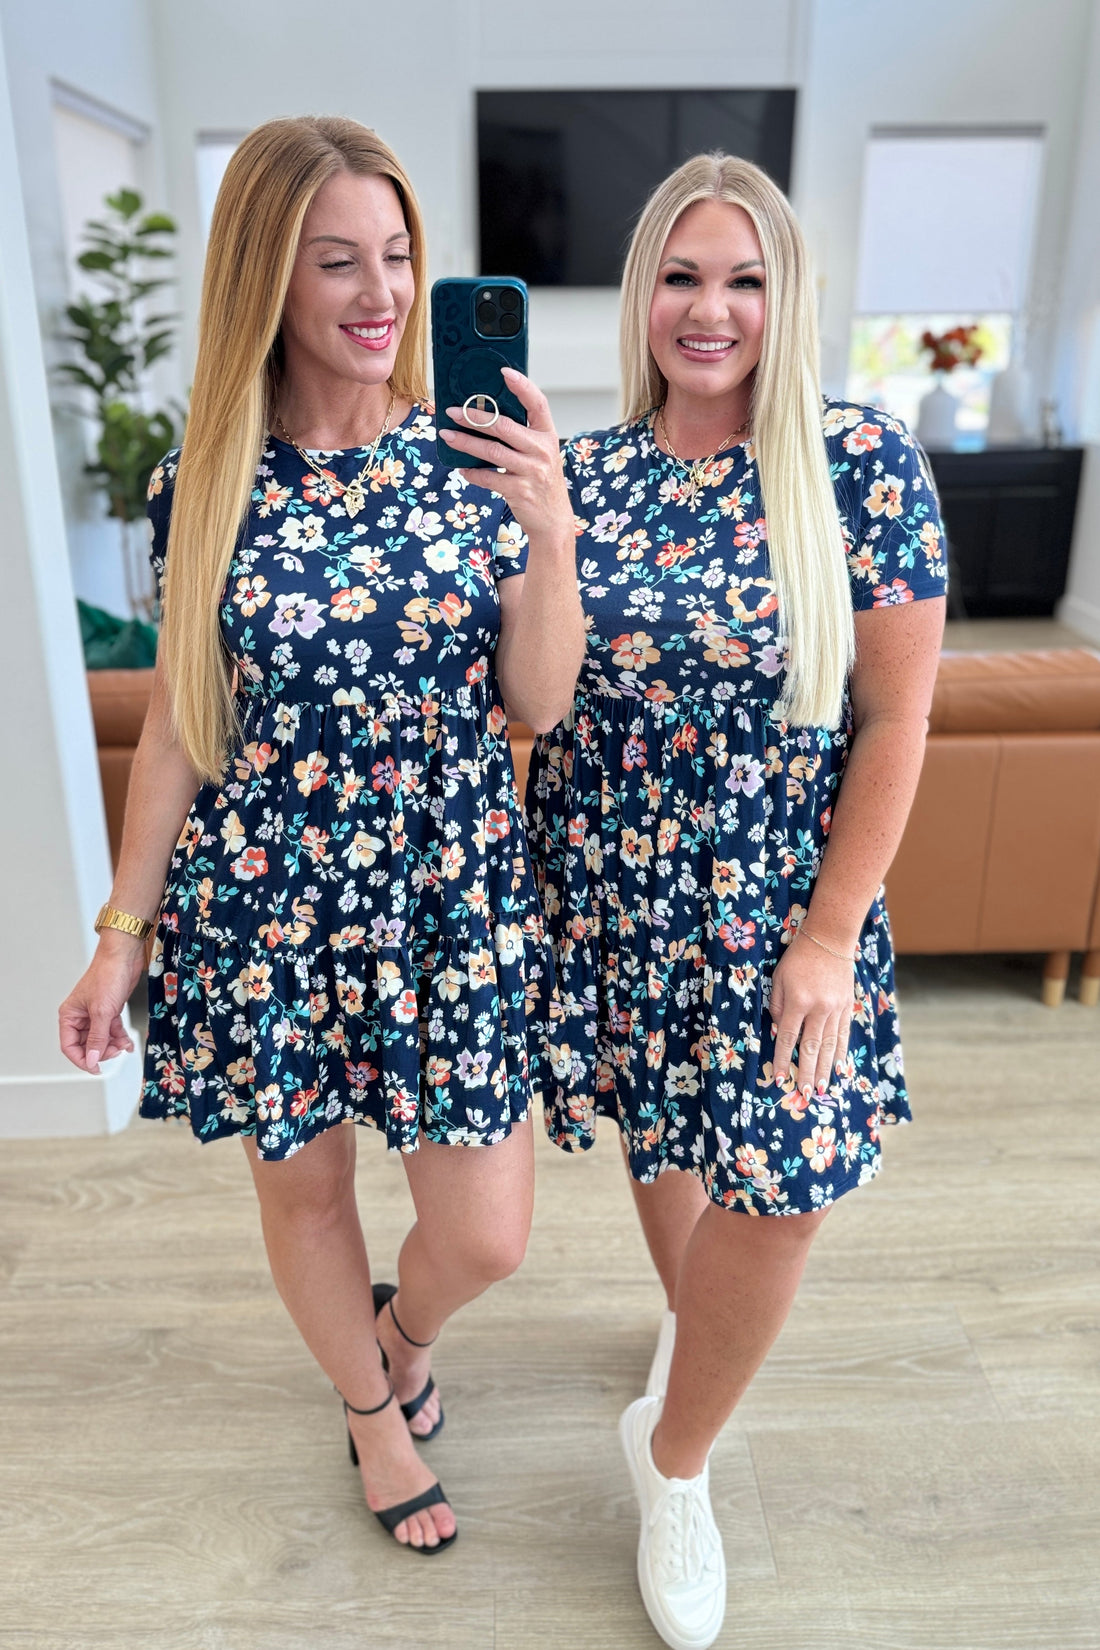 French Friday Floral Dress